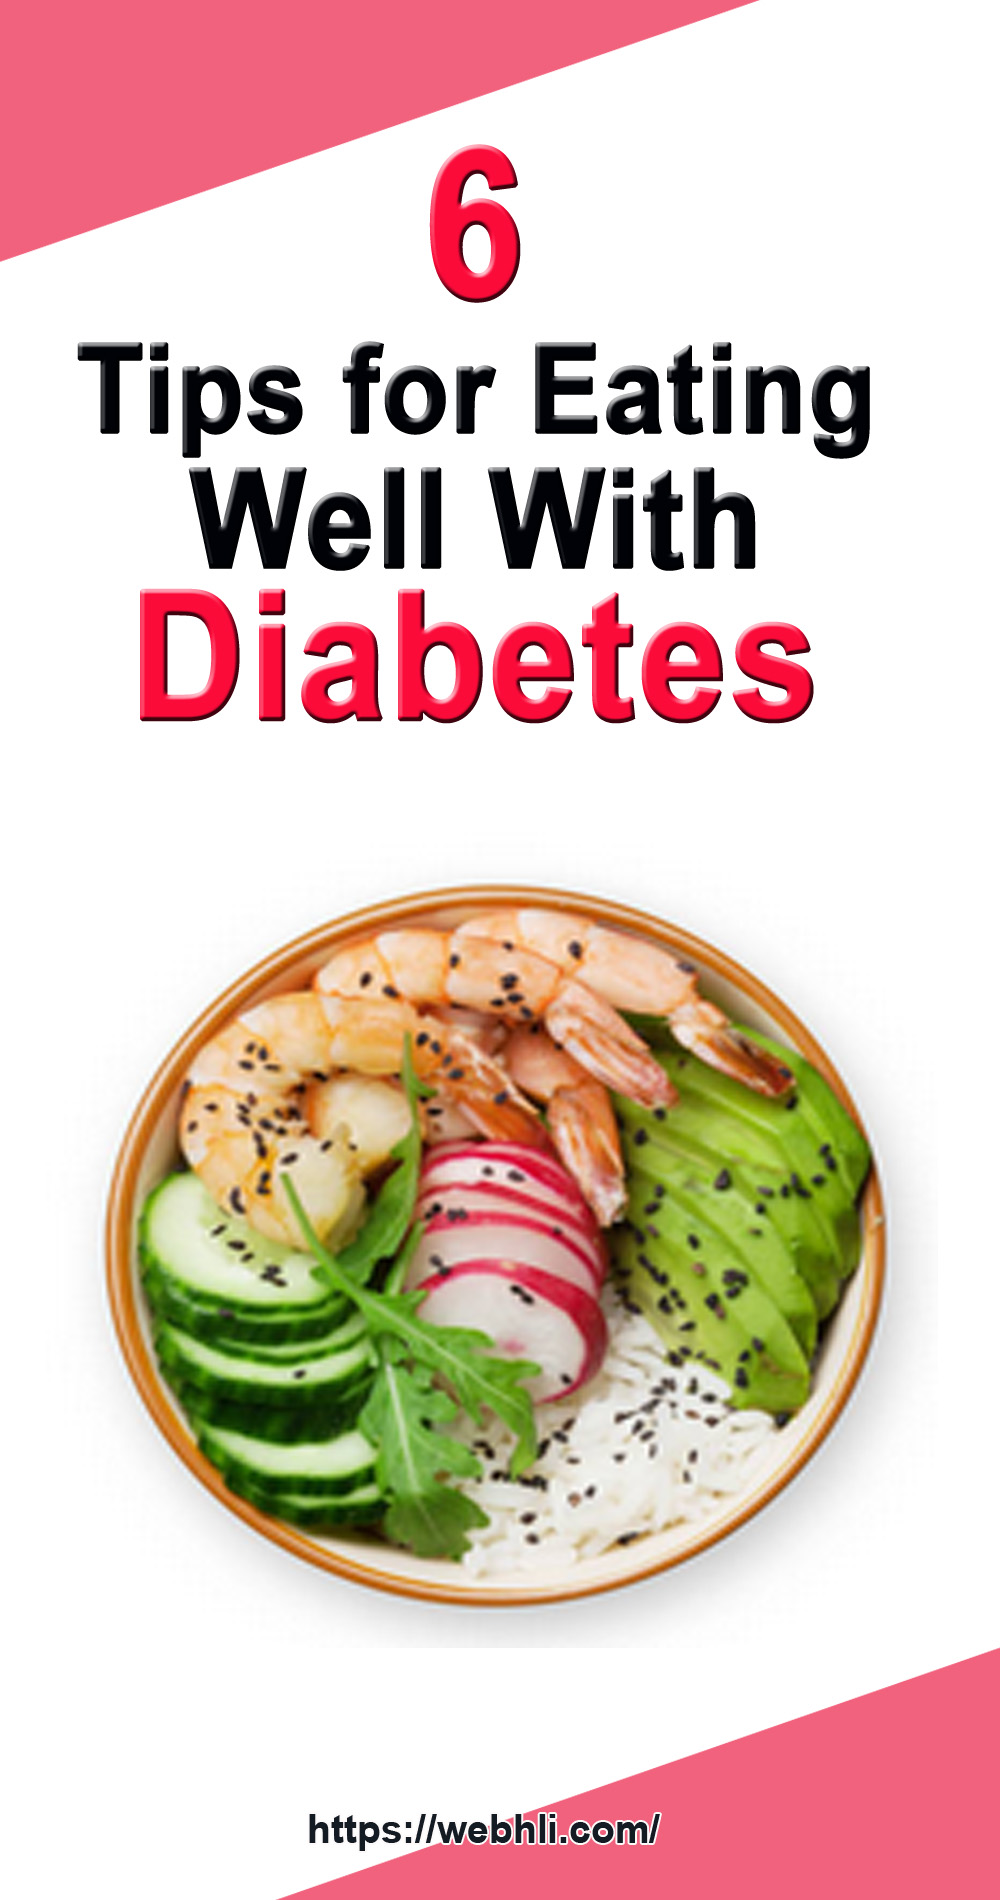 6 Tips for Eating Well With Diabetes | Healthy Lifestyle